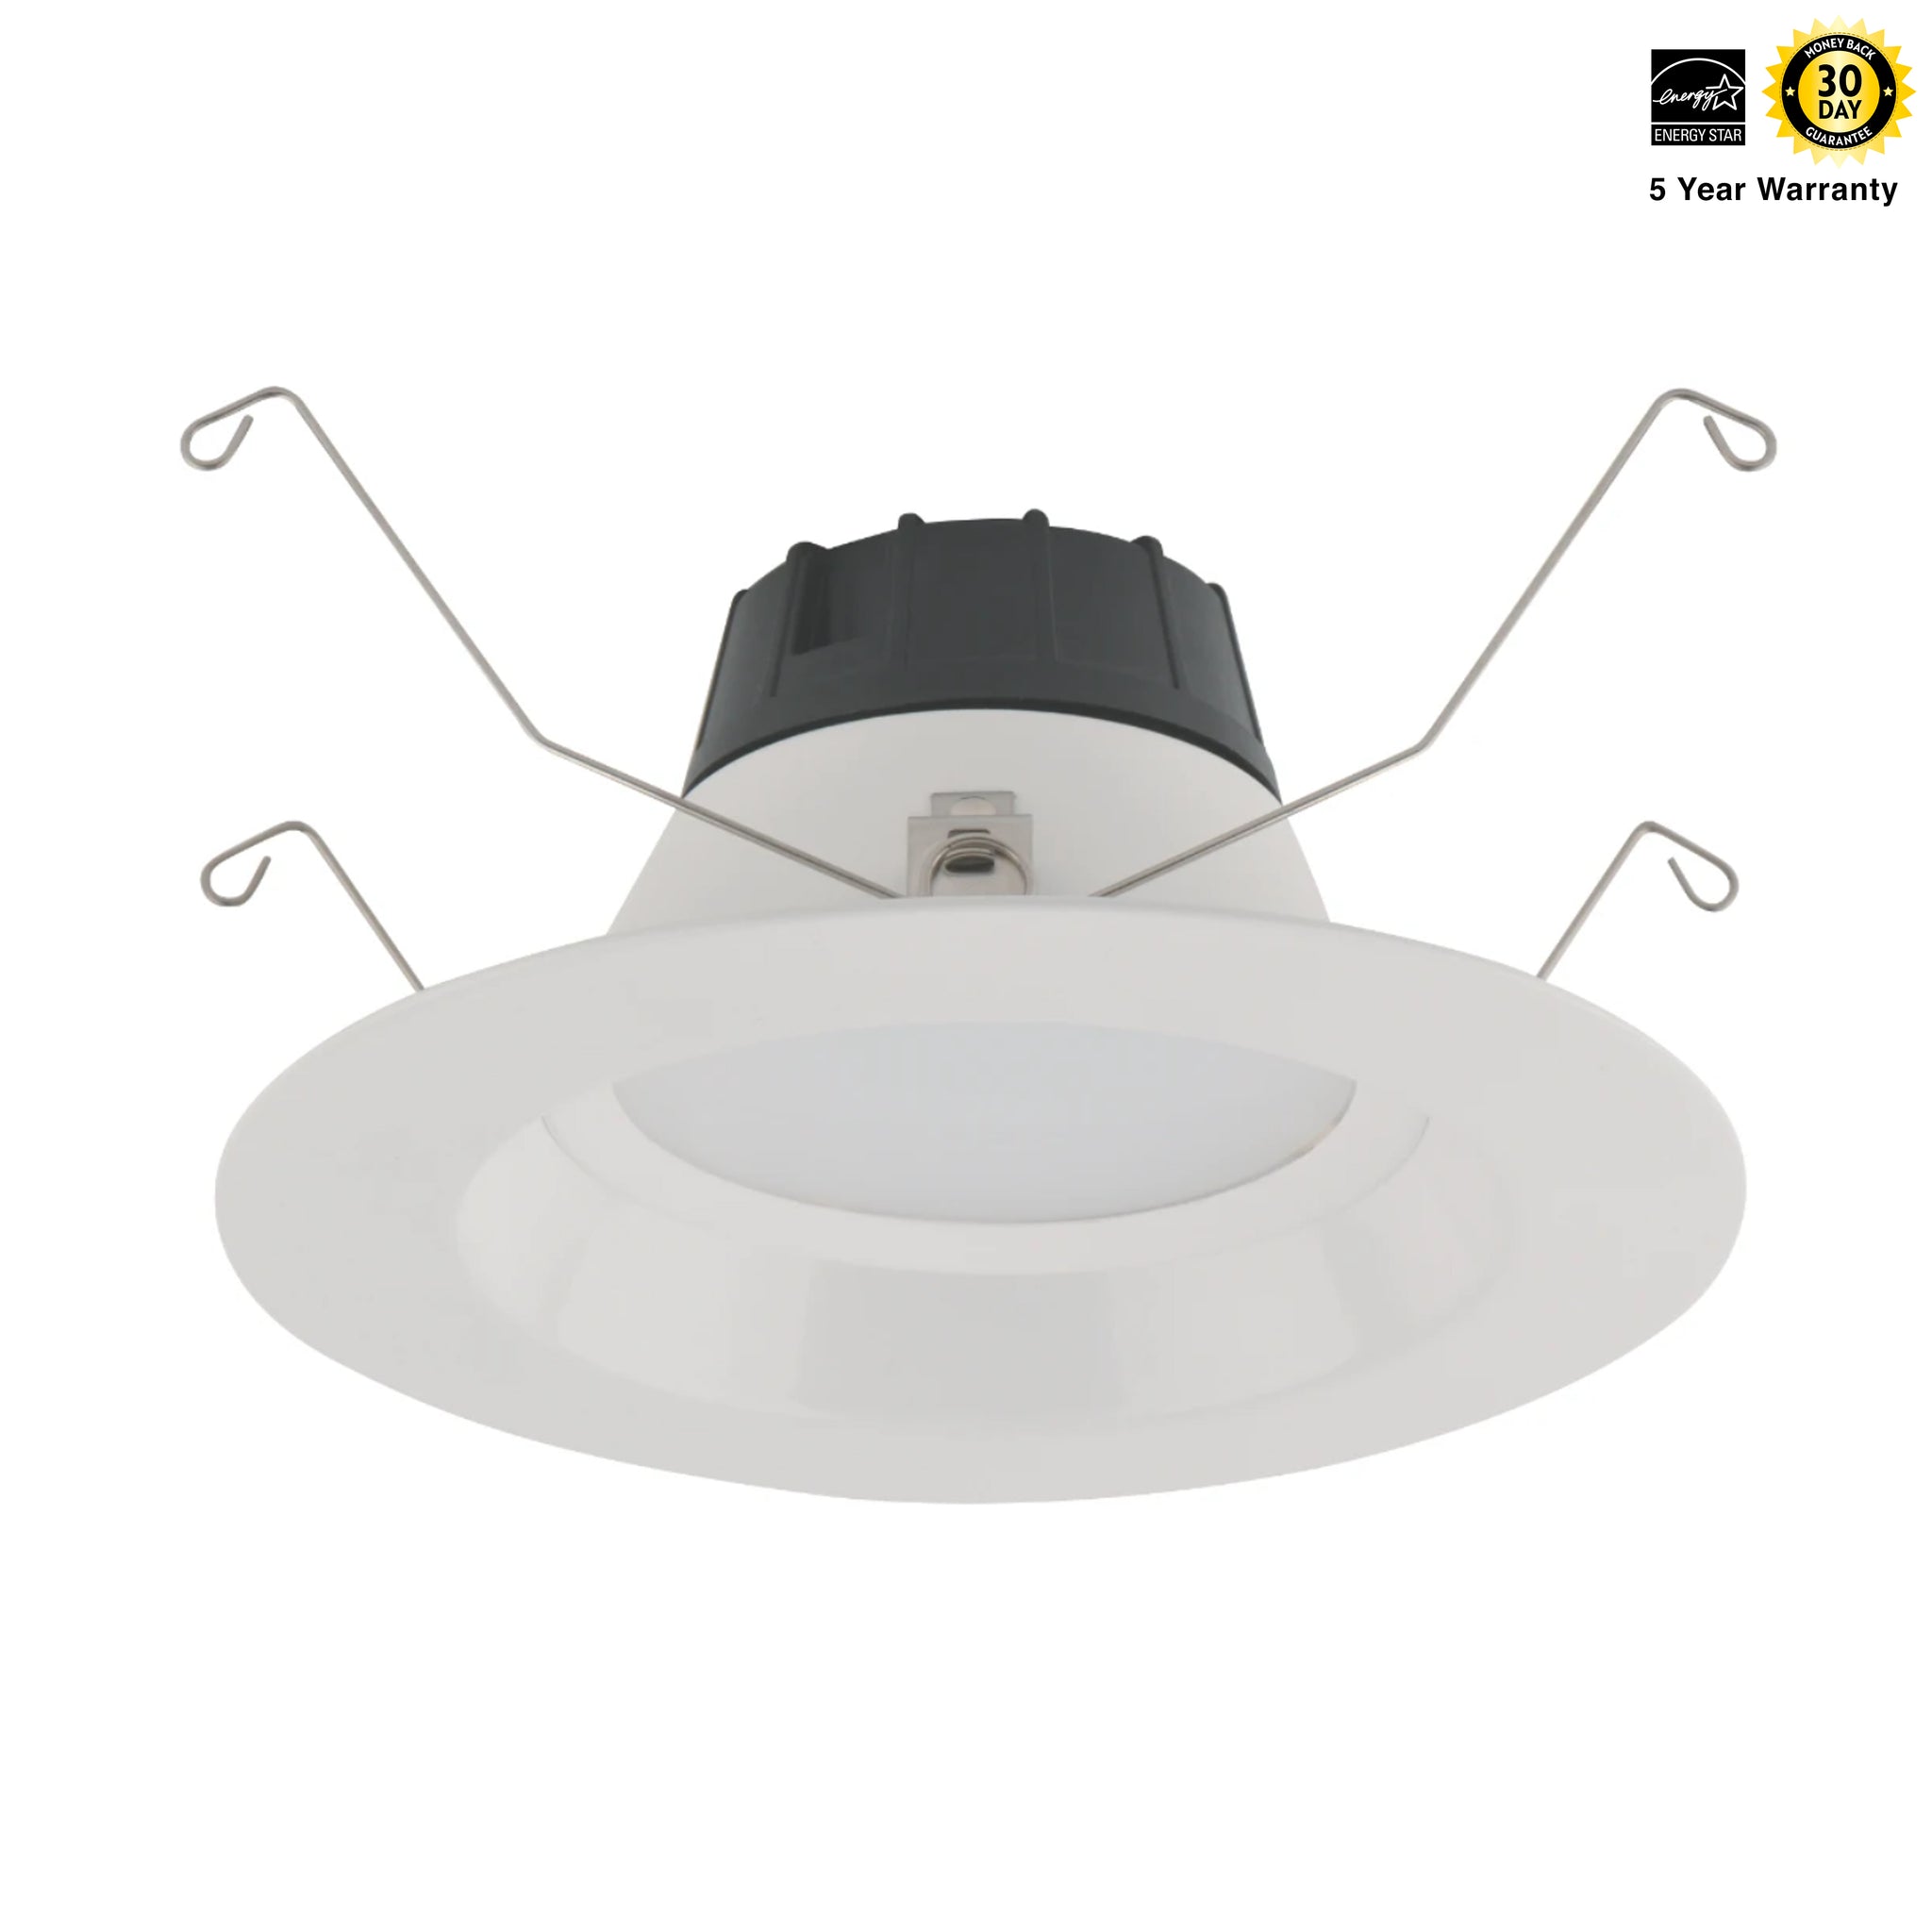 dimmable led recessed downlight, recessed led downlights, dimmable led retrofit recessed downlight, gimbal led downlight retrofits, dimmable led recessed ceiling lights, retrofit led downlight, led ceiling downlights, 1 led downlights